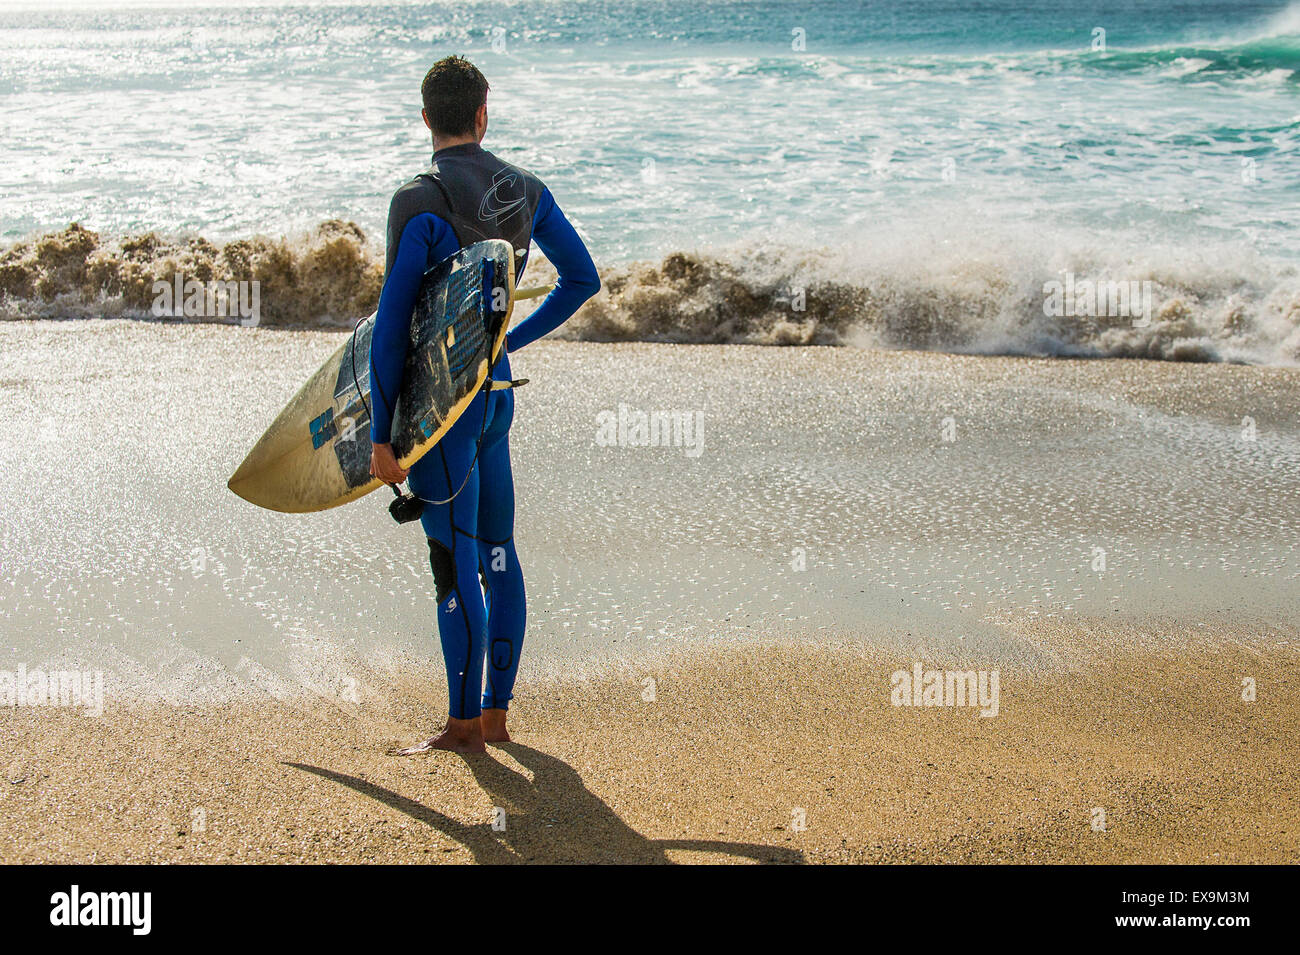 A surfer standing on Fistral beach in Newquay, Cornwall. UK. Stock Photo